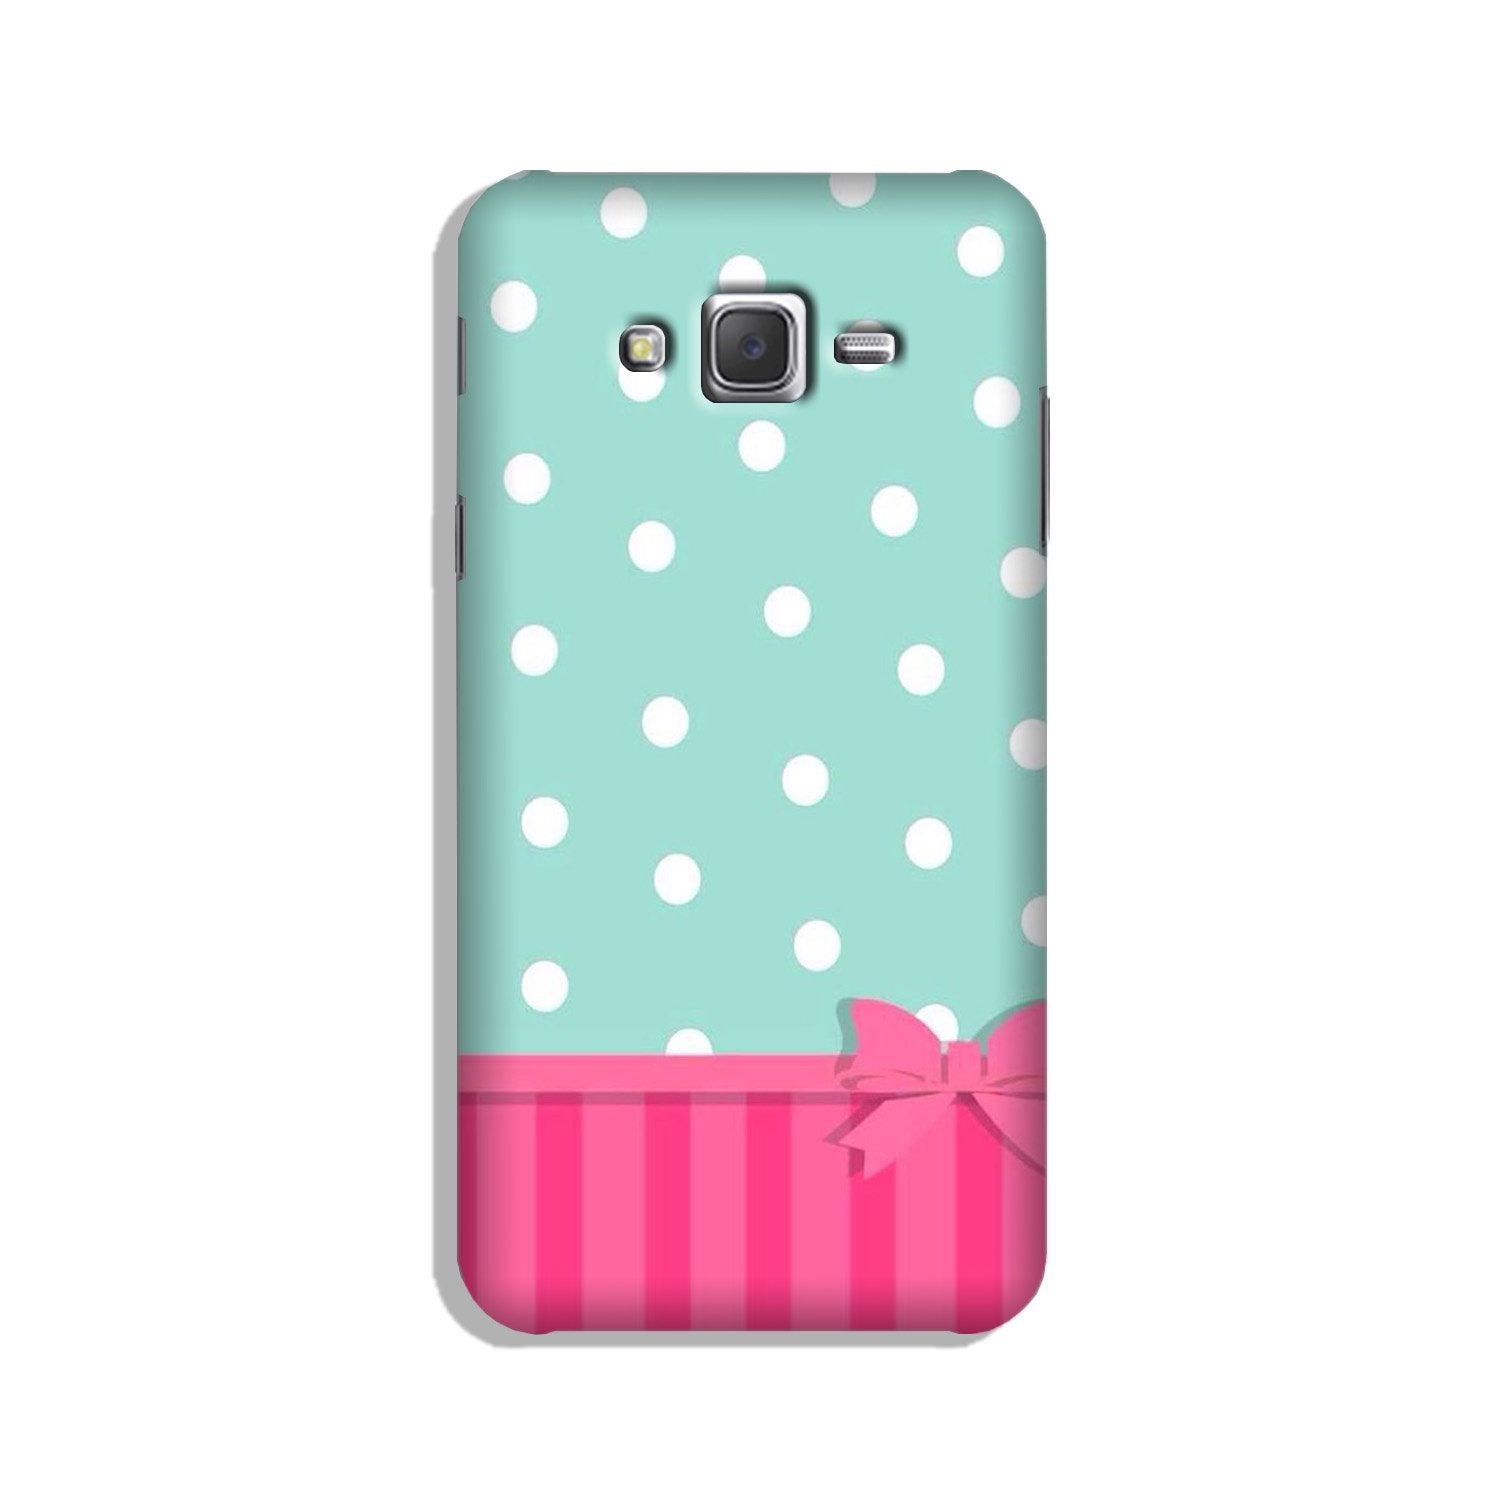 Gift Wrap Case for Galaxy J7 (2015)